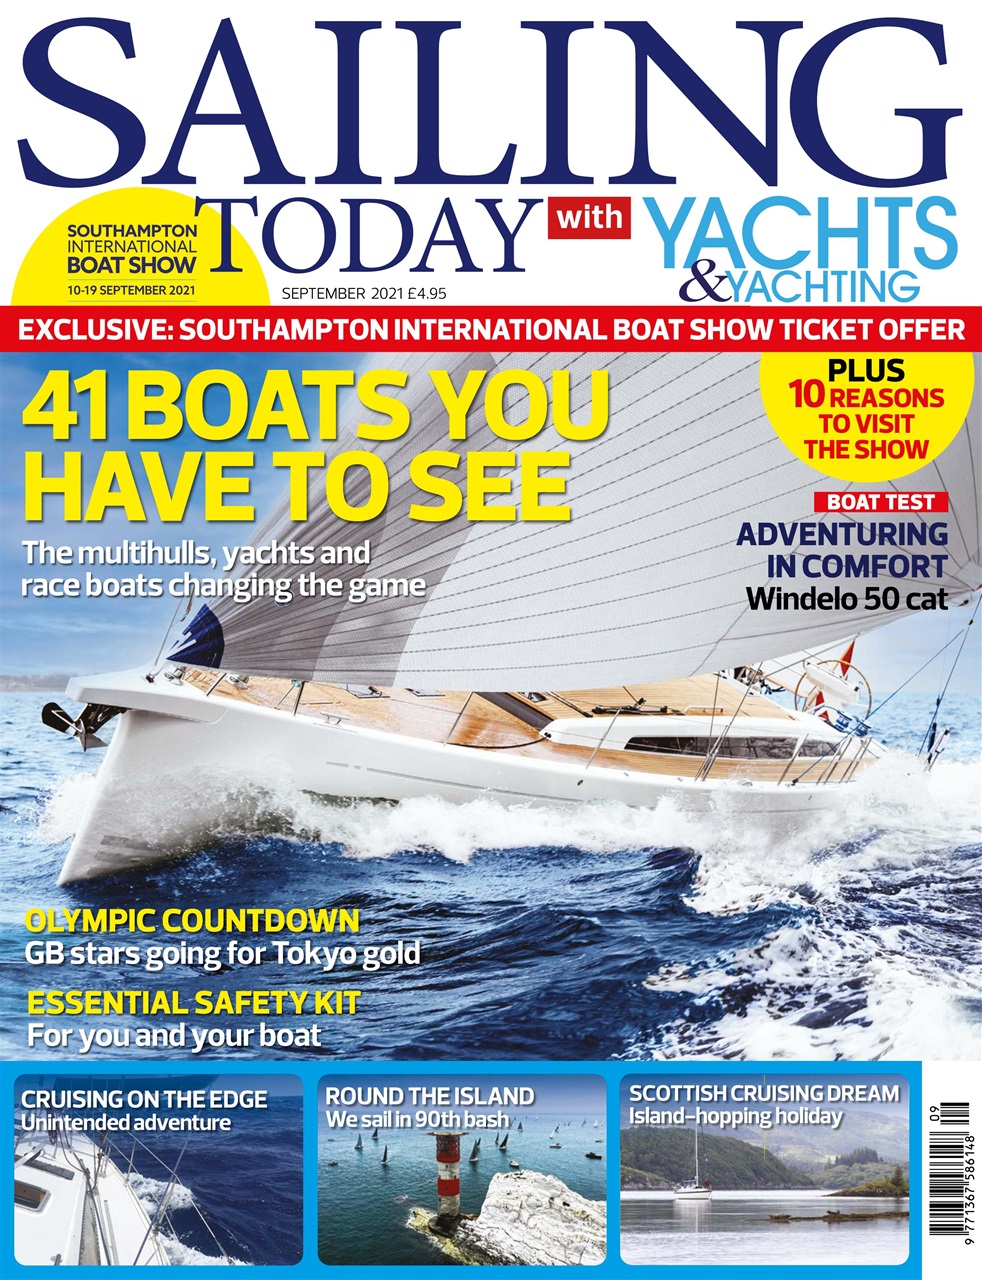 yachts and yachting subscription